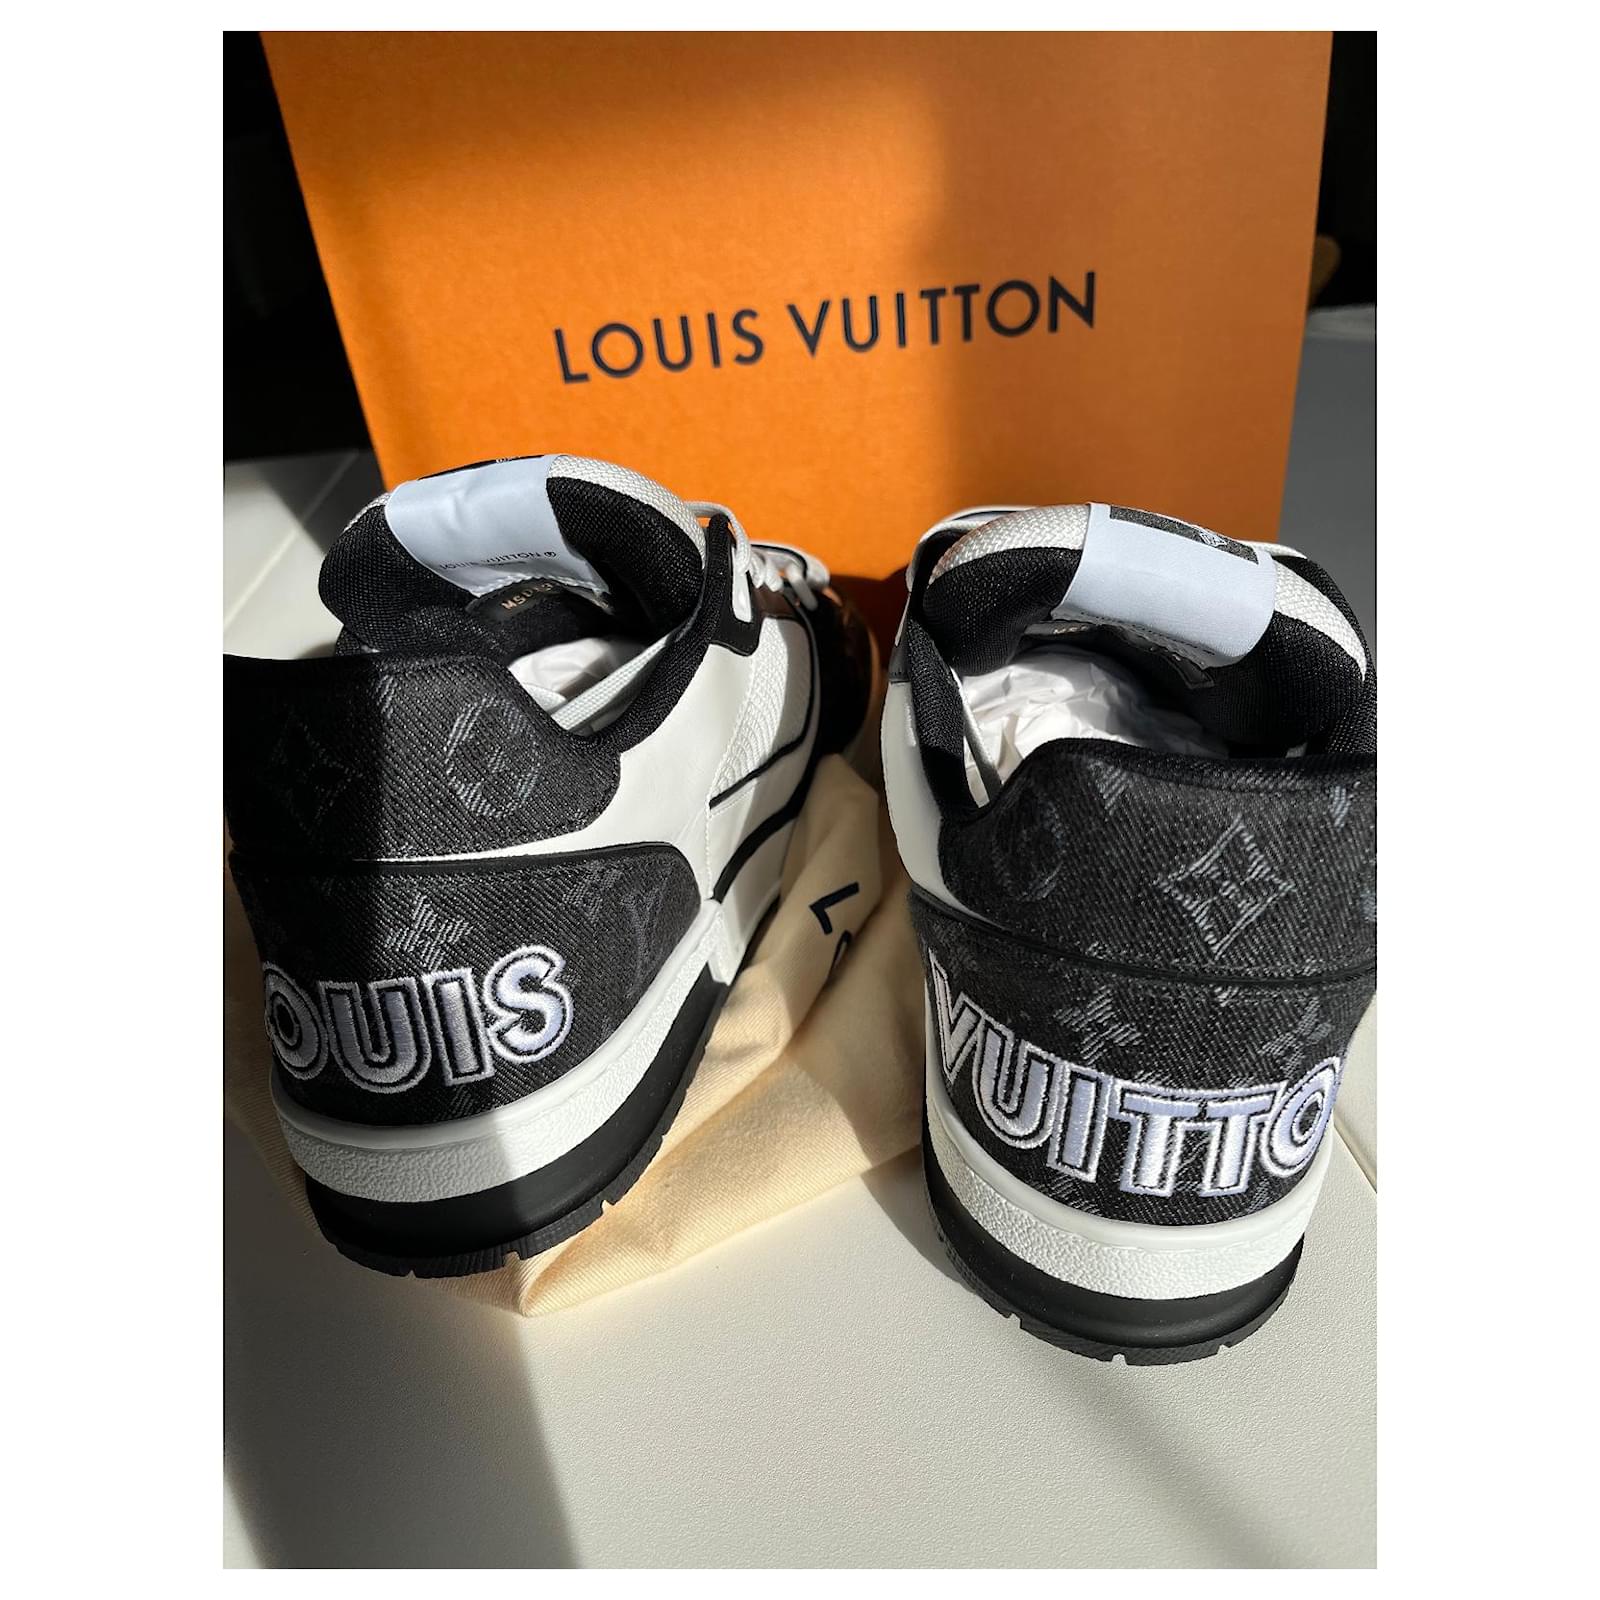 IN HAND Review LV Black & White Trainers from Villain ¥719 : r